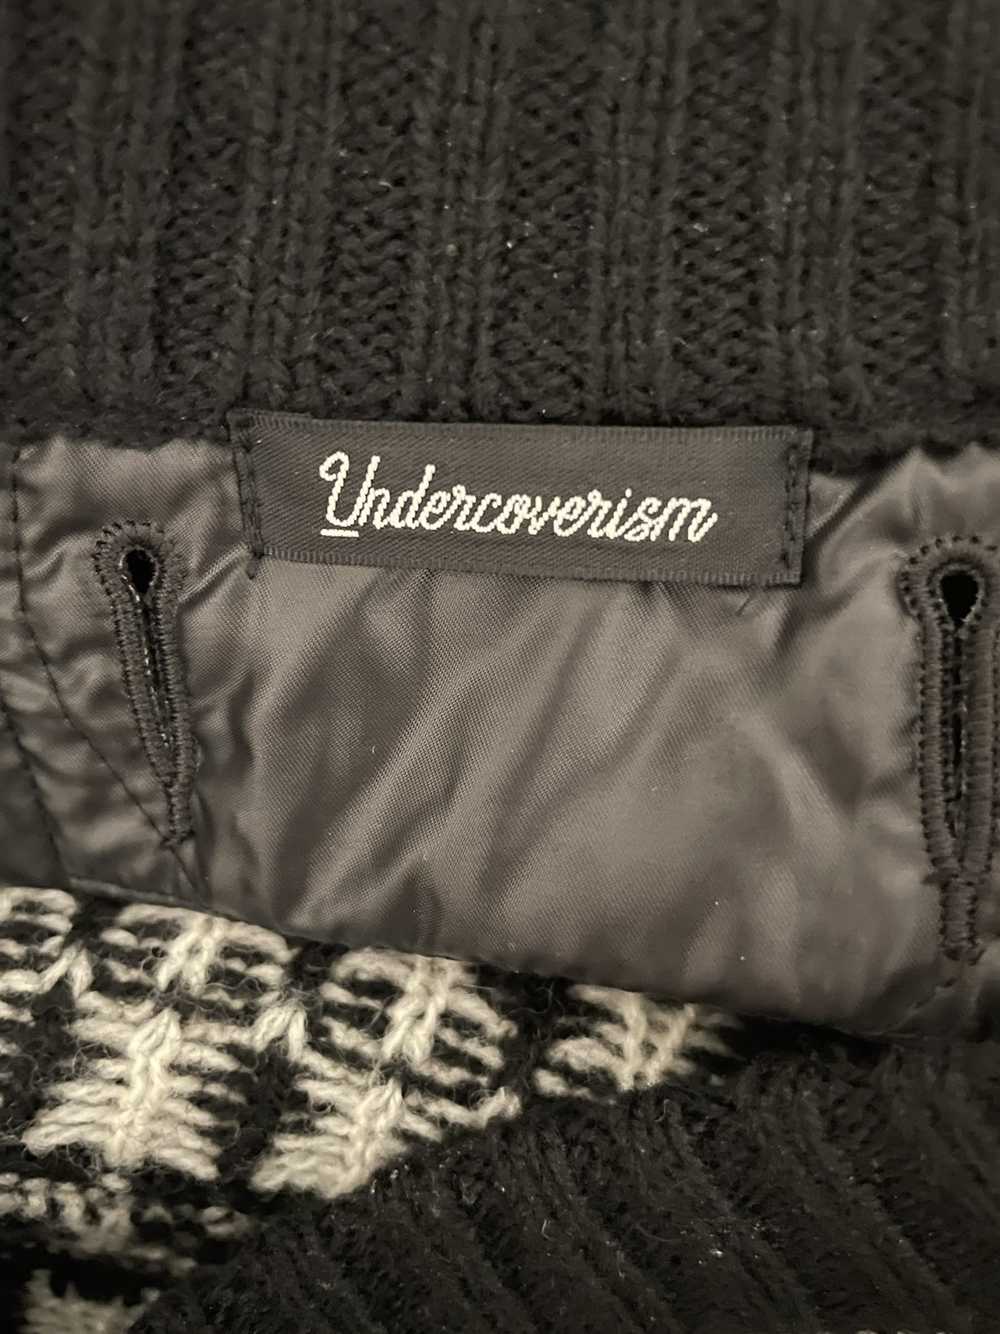 Undercover Undercoverism knit wear/sweater - image 5